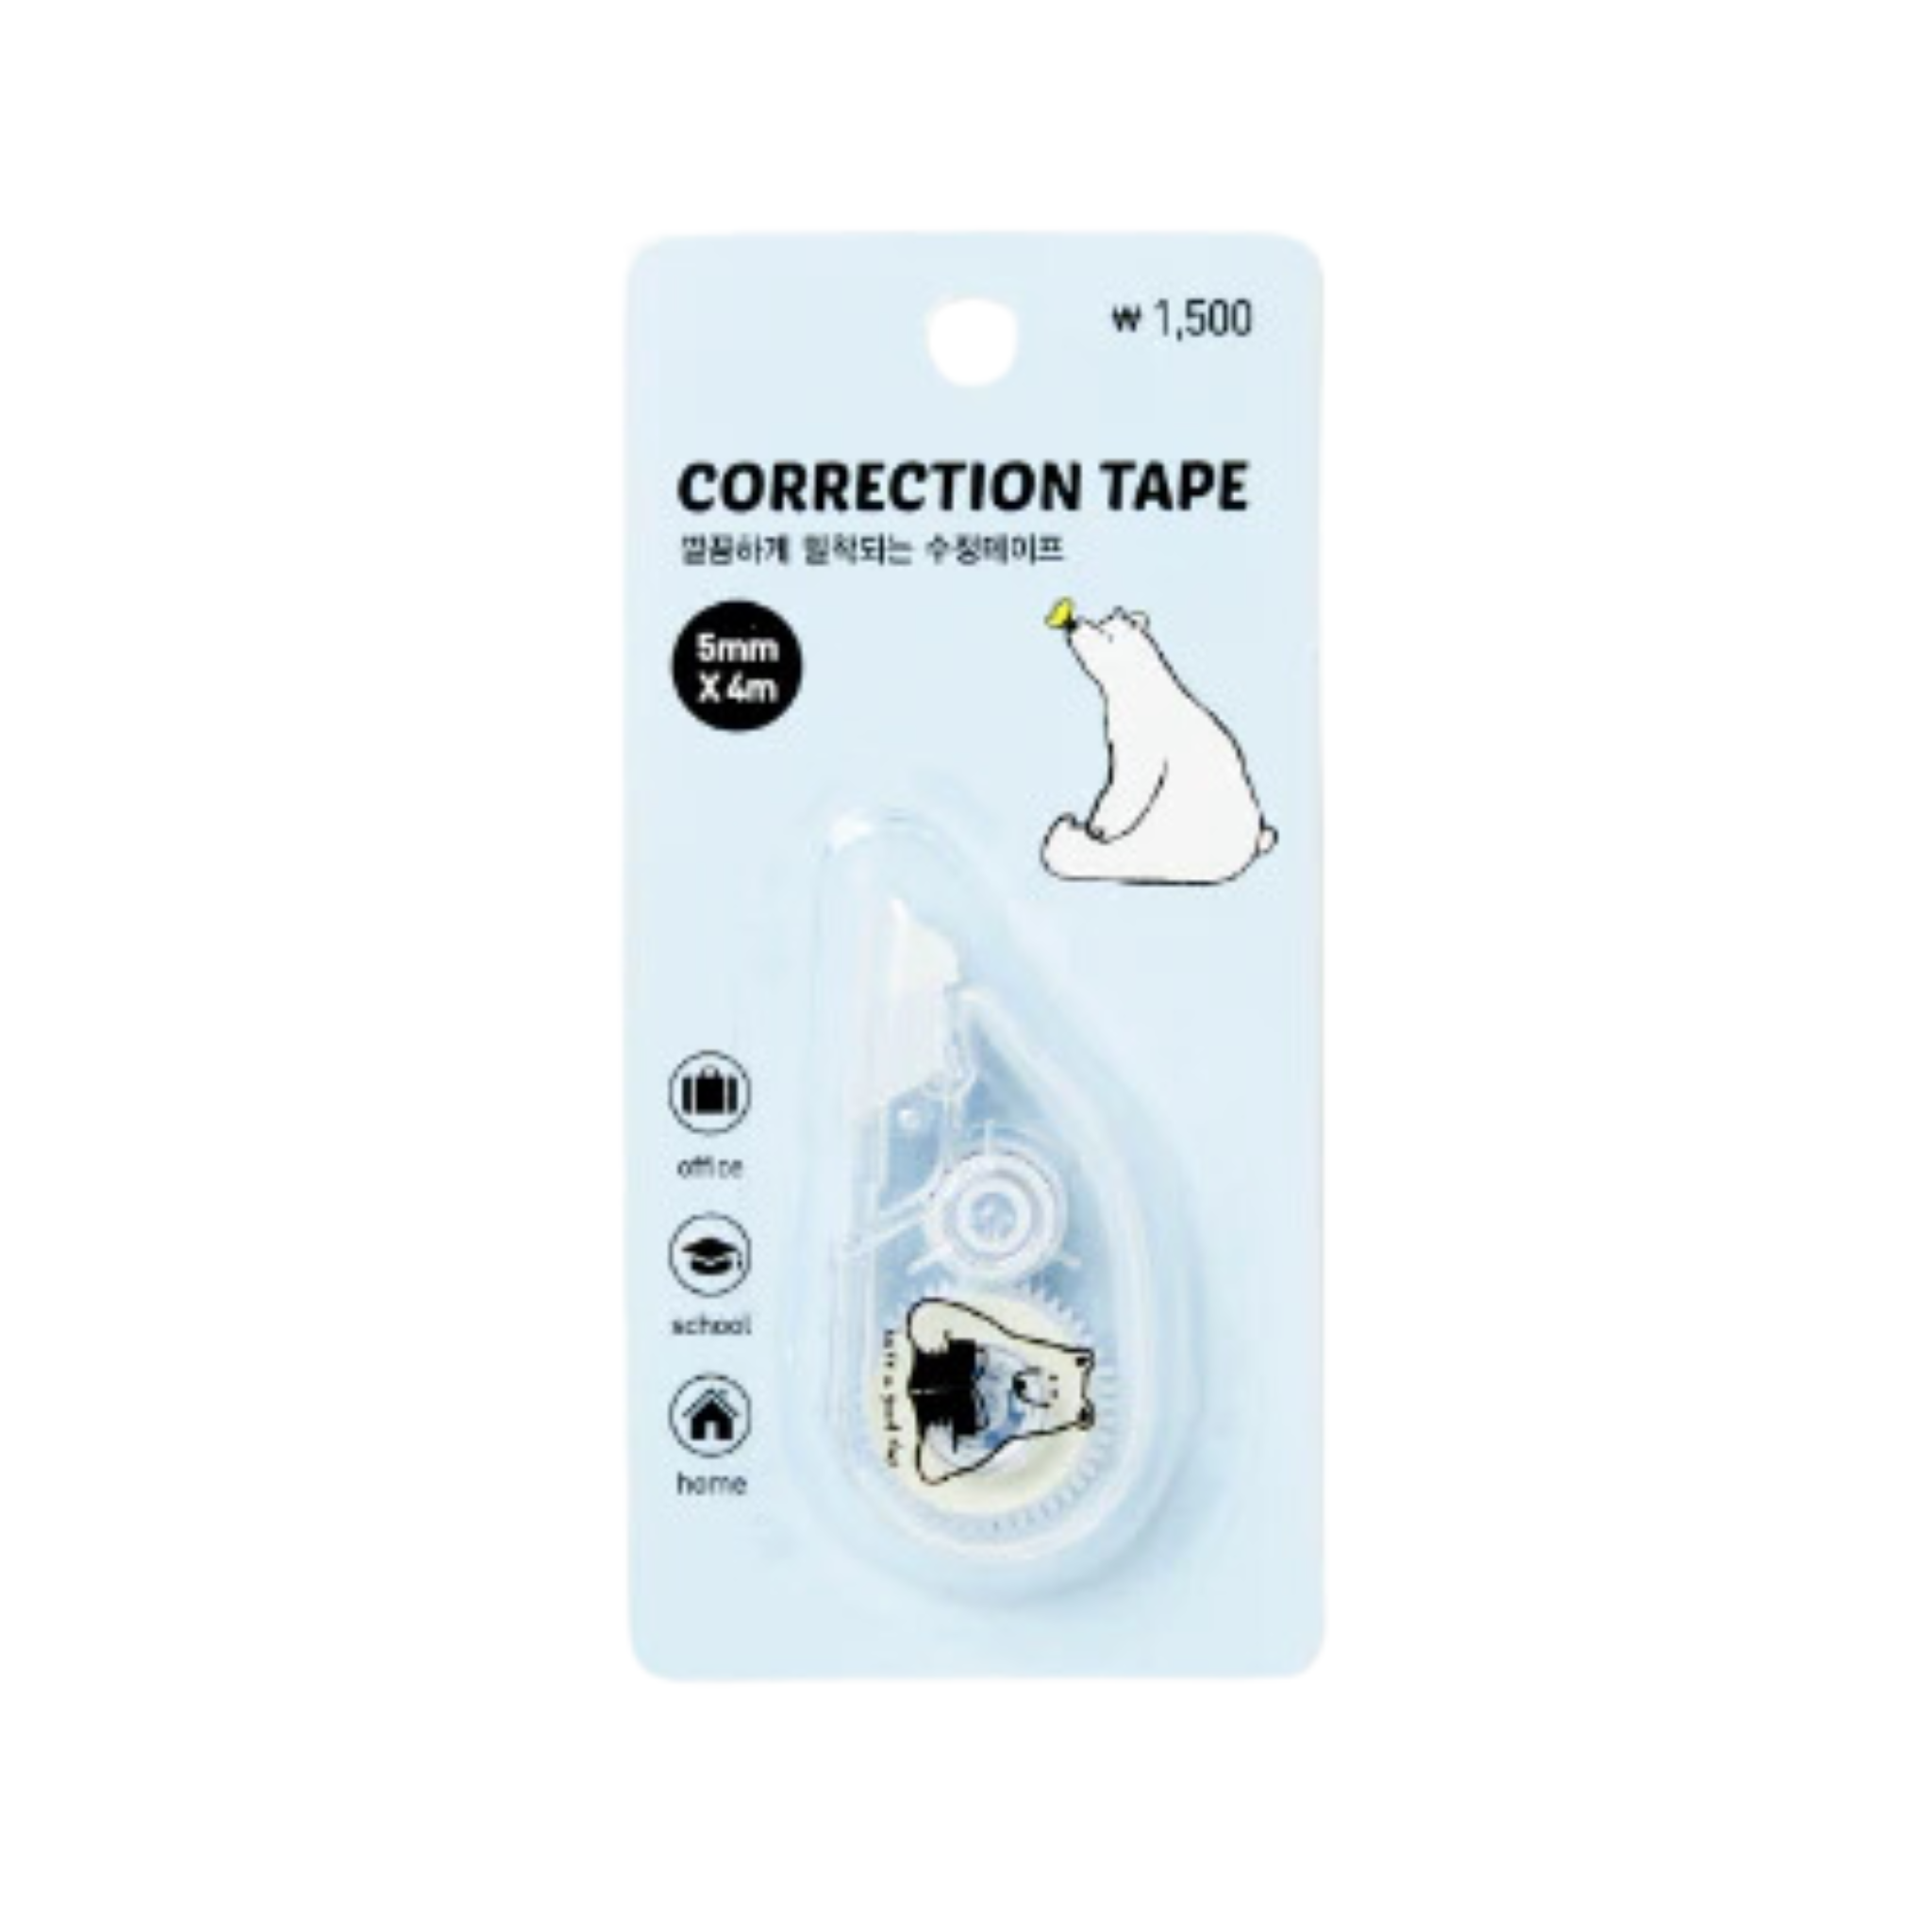 CorrectionTapePolarBear5mm.png